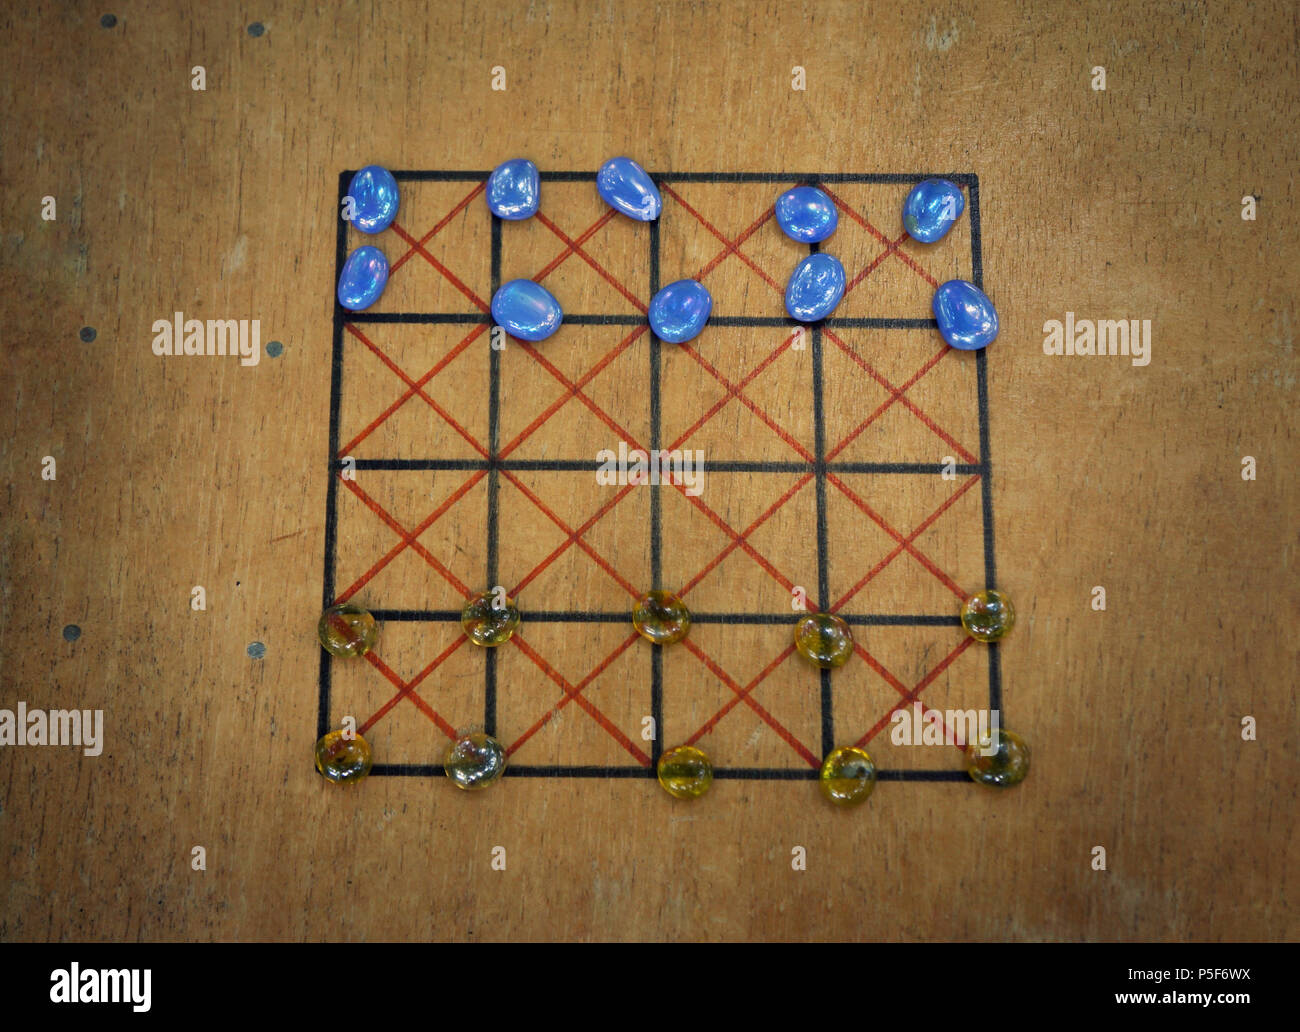 A replica of a roman board game with glass playing pieces. Stock Photo